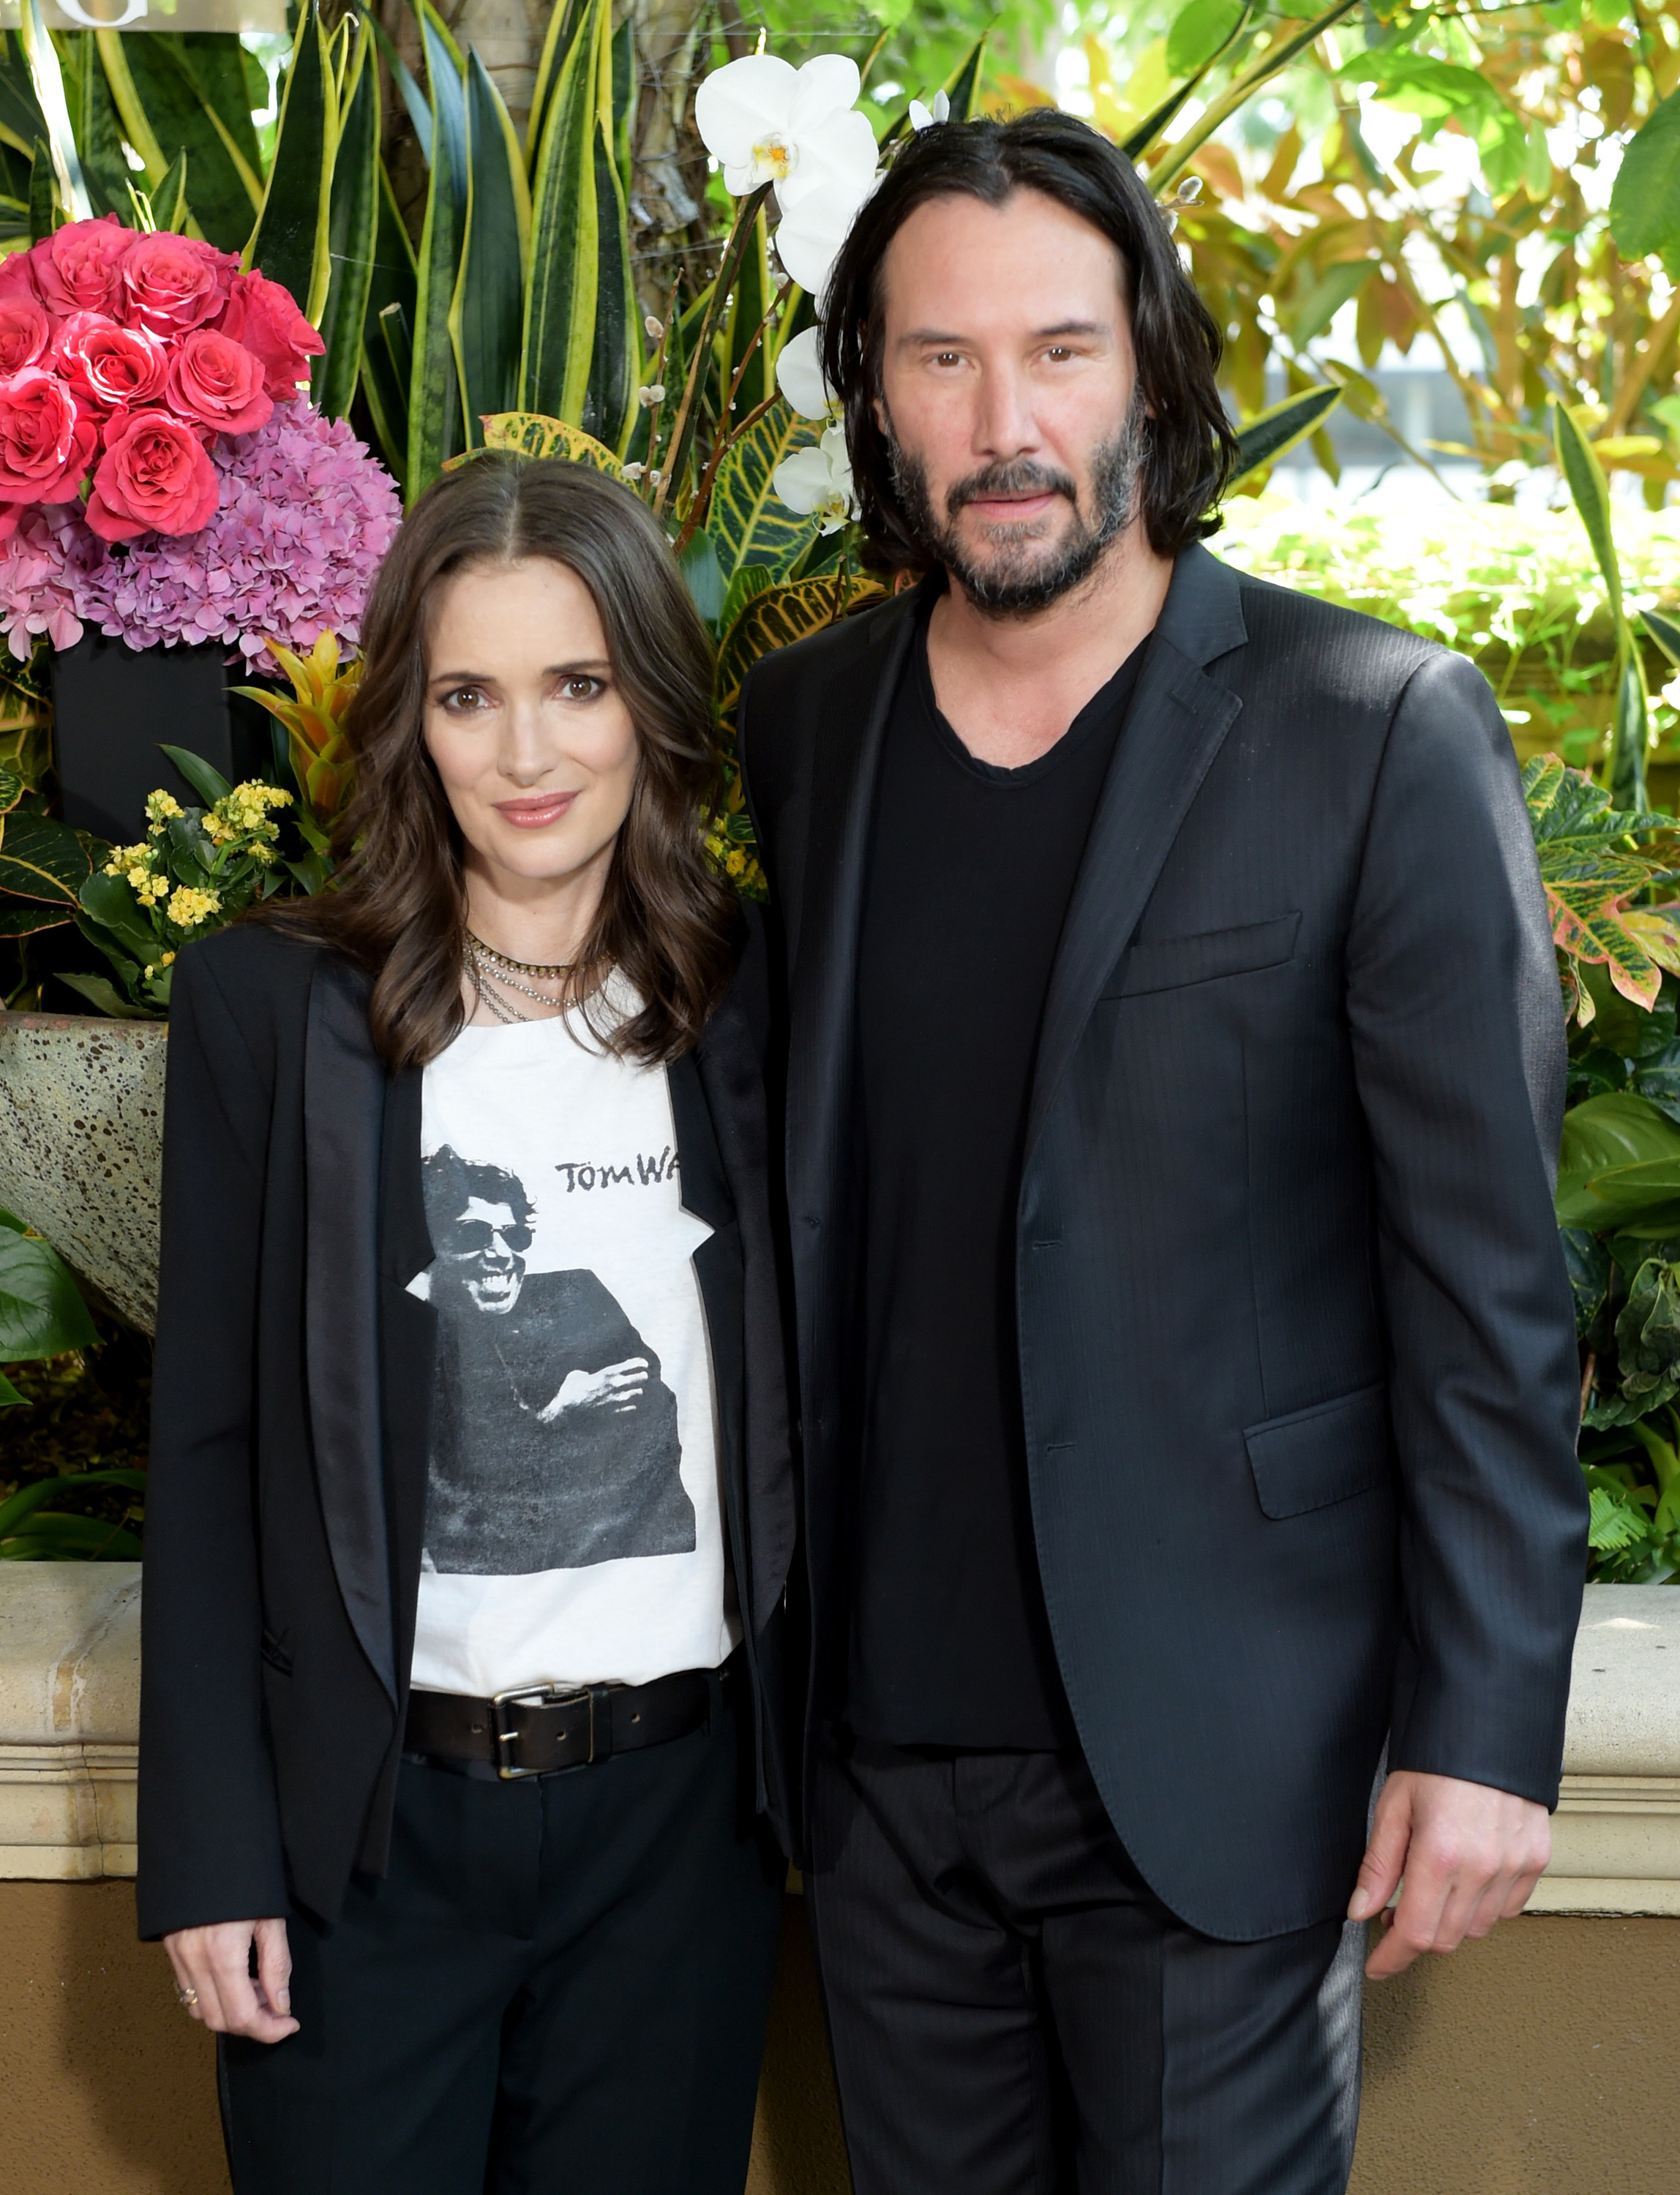 Winona Ryder and Keanu Reeves at the "Destination Wedding" photo call in Los Angeles, 2018 | Source: Getty Images